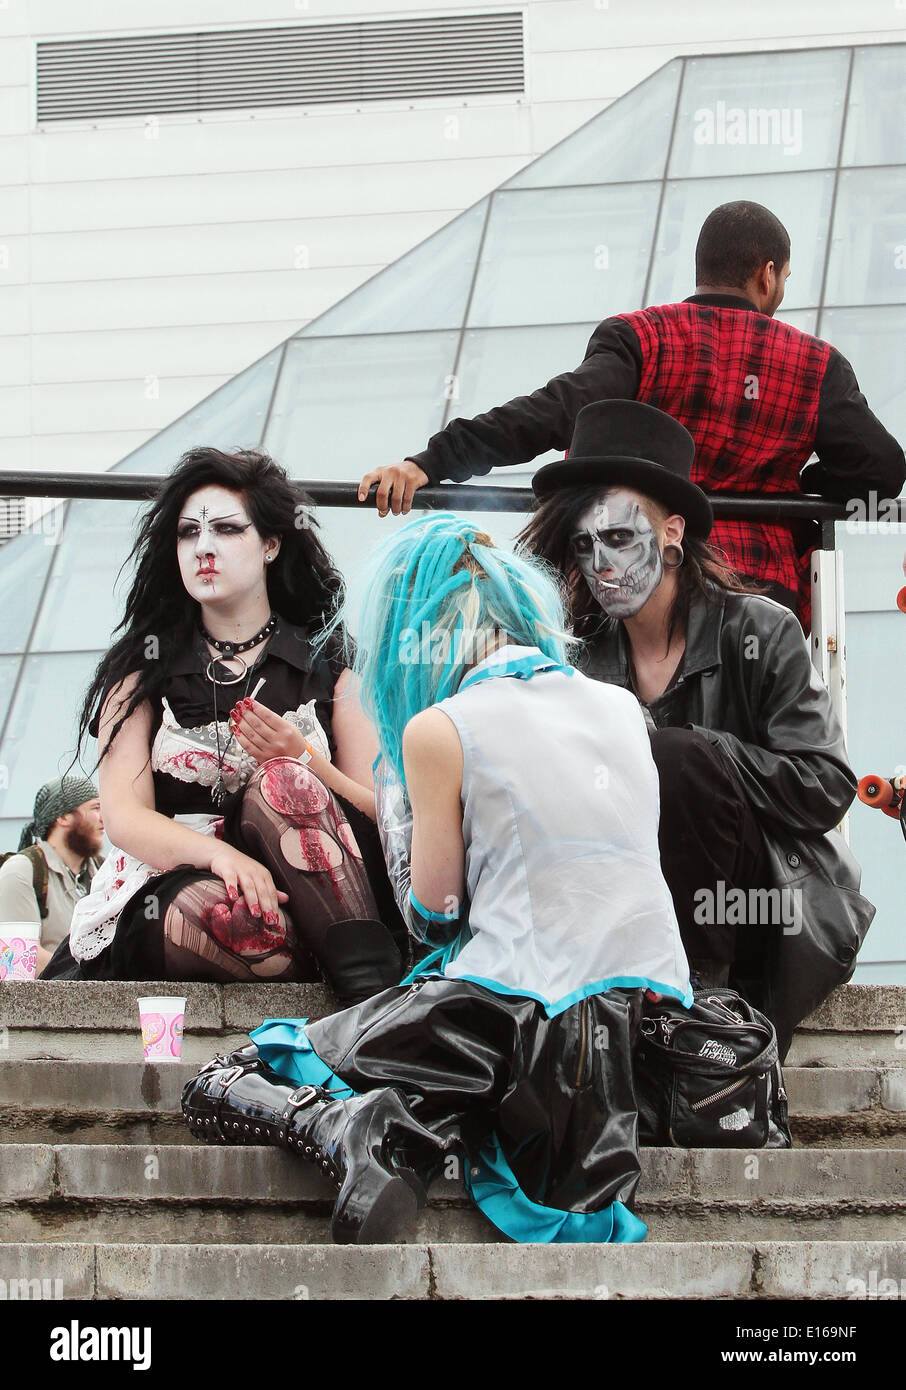 London, UK. 23rd May, 2014. Visitors in costume at the MCM Comic Con pop-culture convention in London. 23.05.2014 Credit:  theodore liasi/Alamy Live News Stock Photo